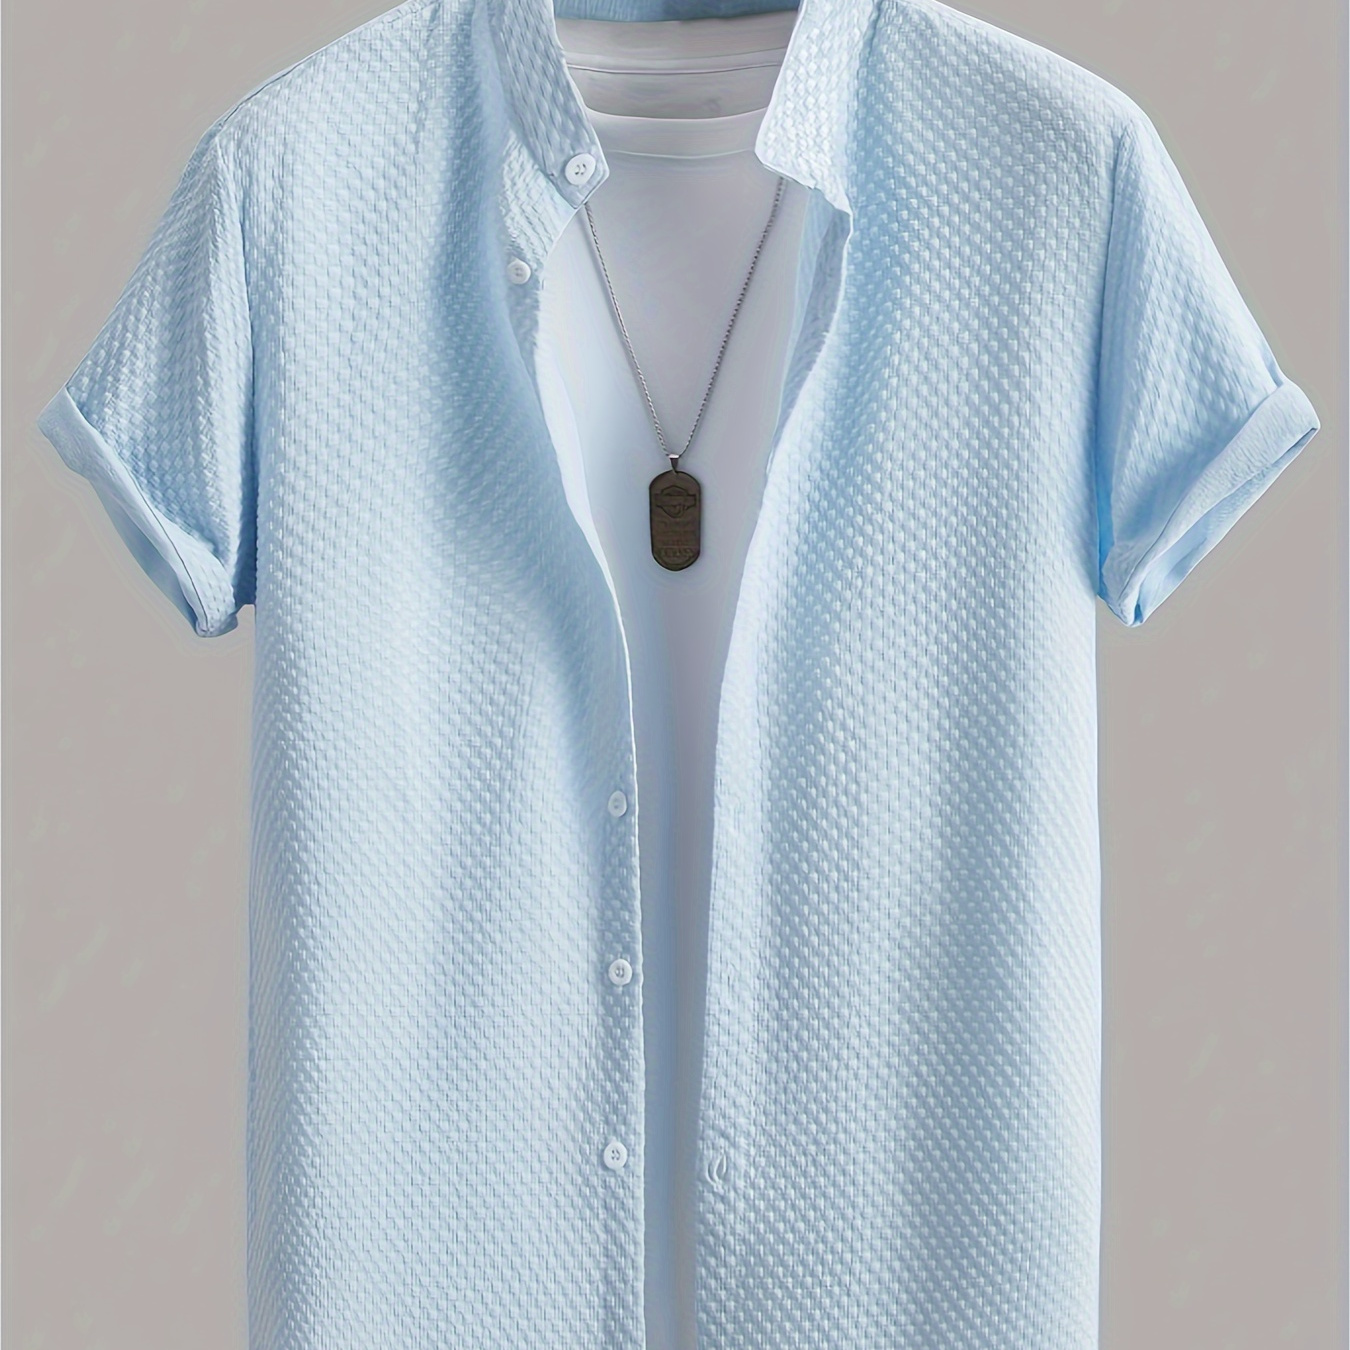 

Casual Textured Men's Short Sleeve Button Down Shirt With Stand Collar For Summer Resort Vacation